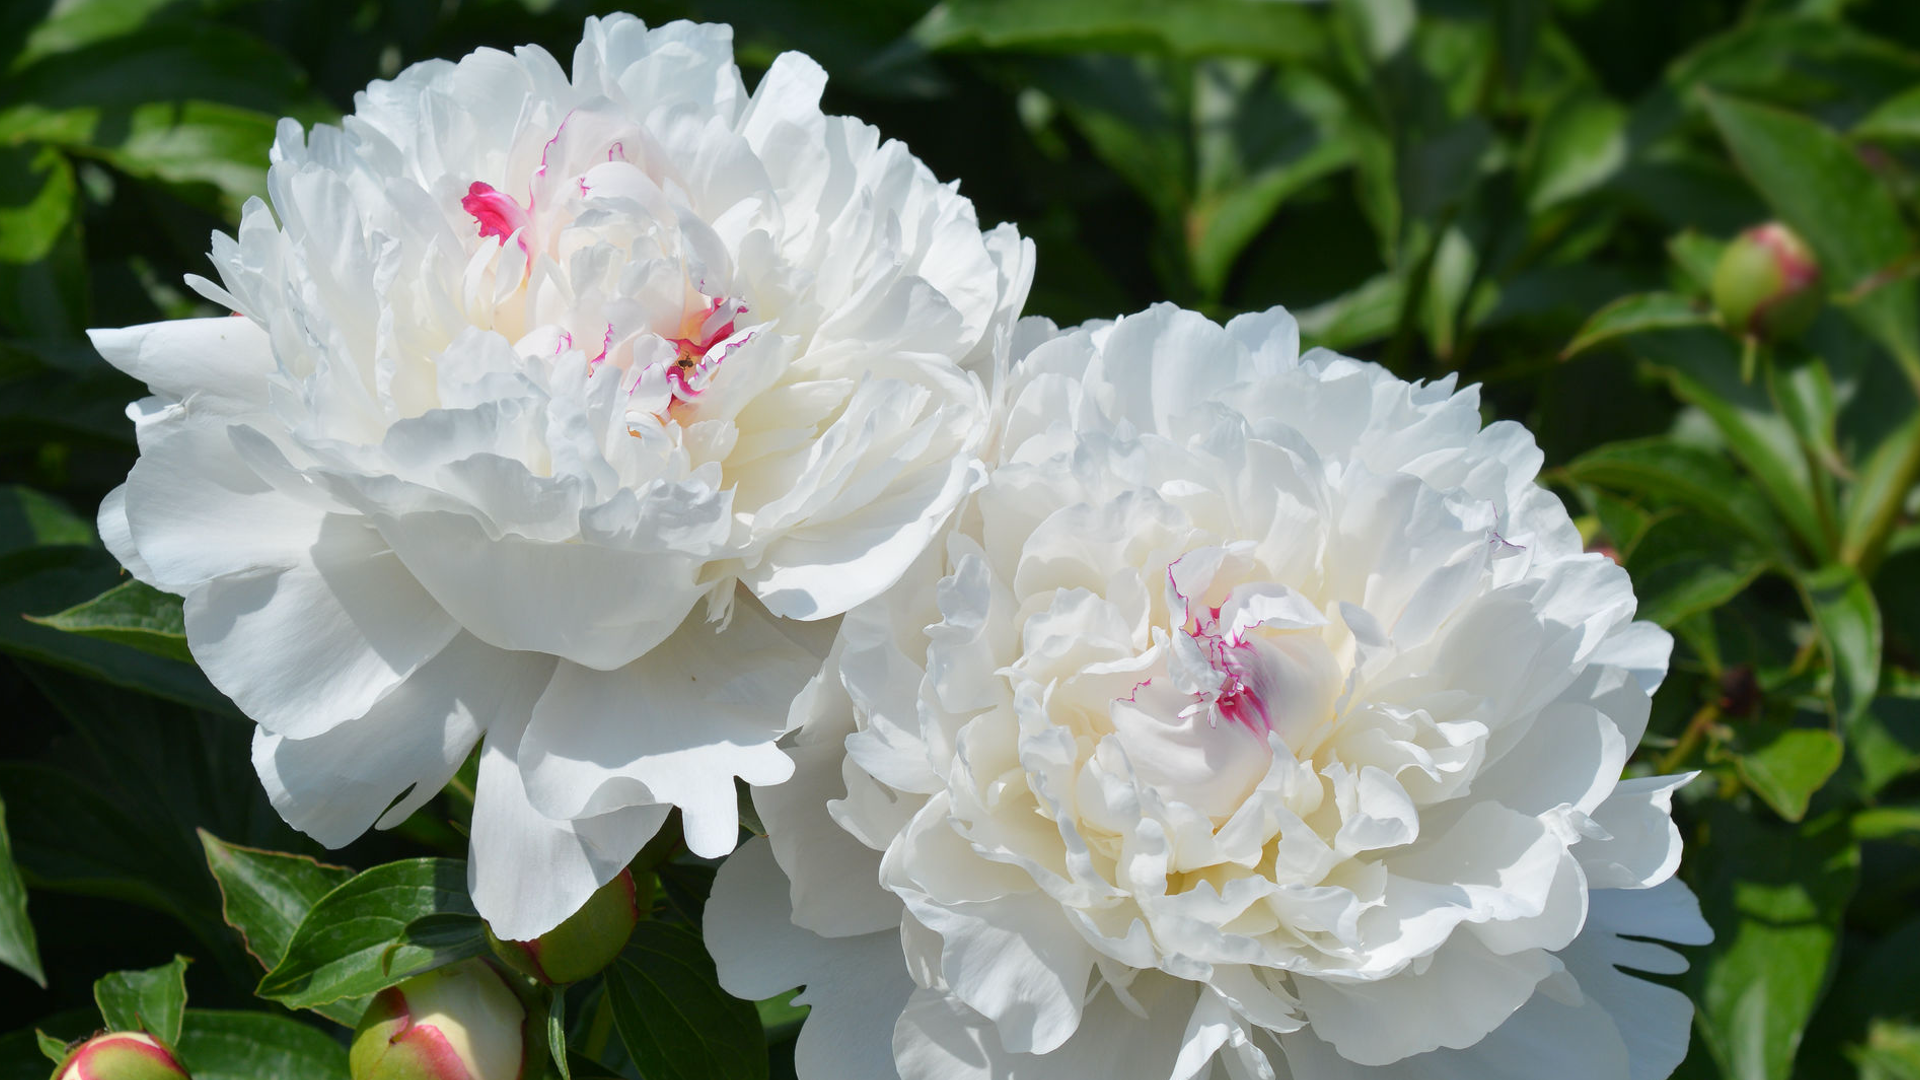 White Peony: A Flower Root for Women’s Health